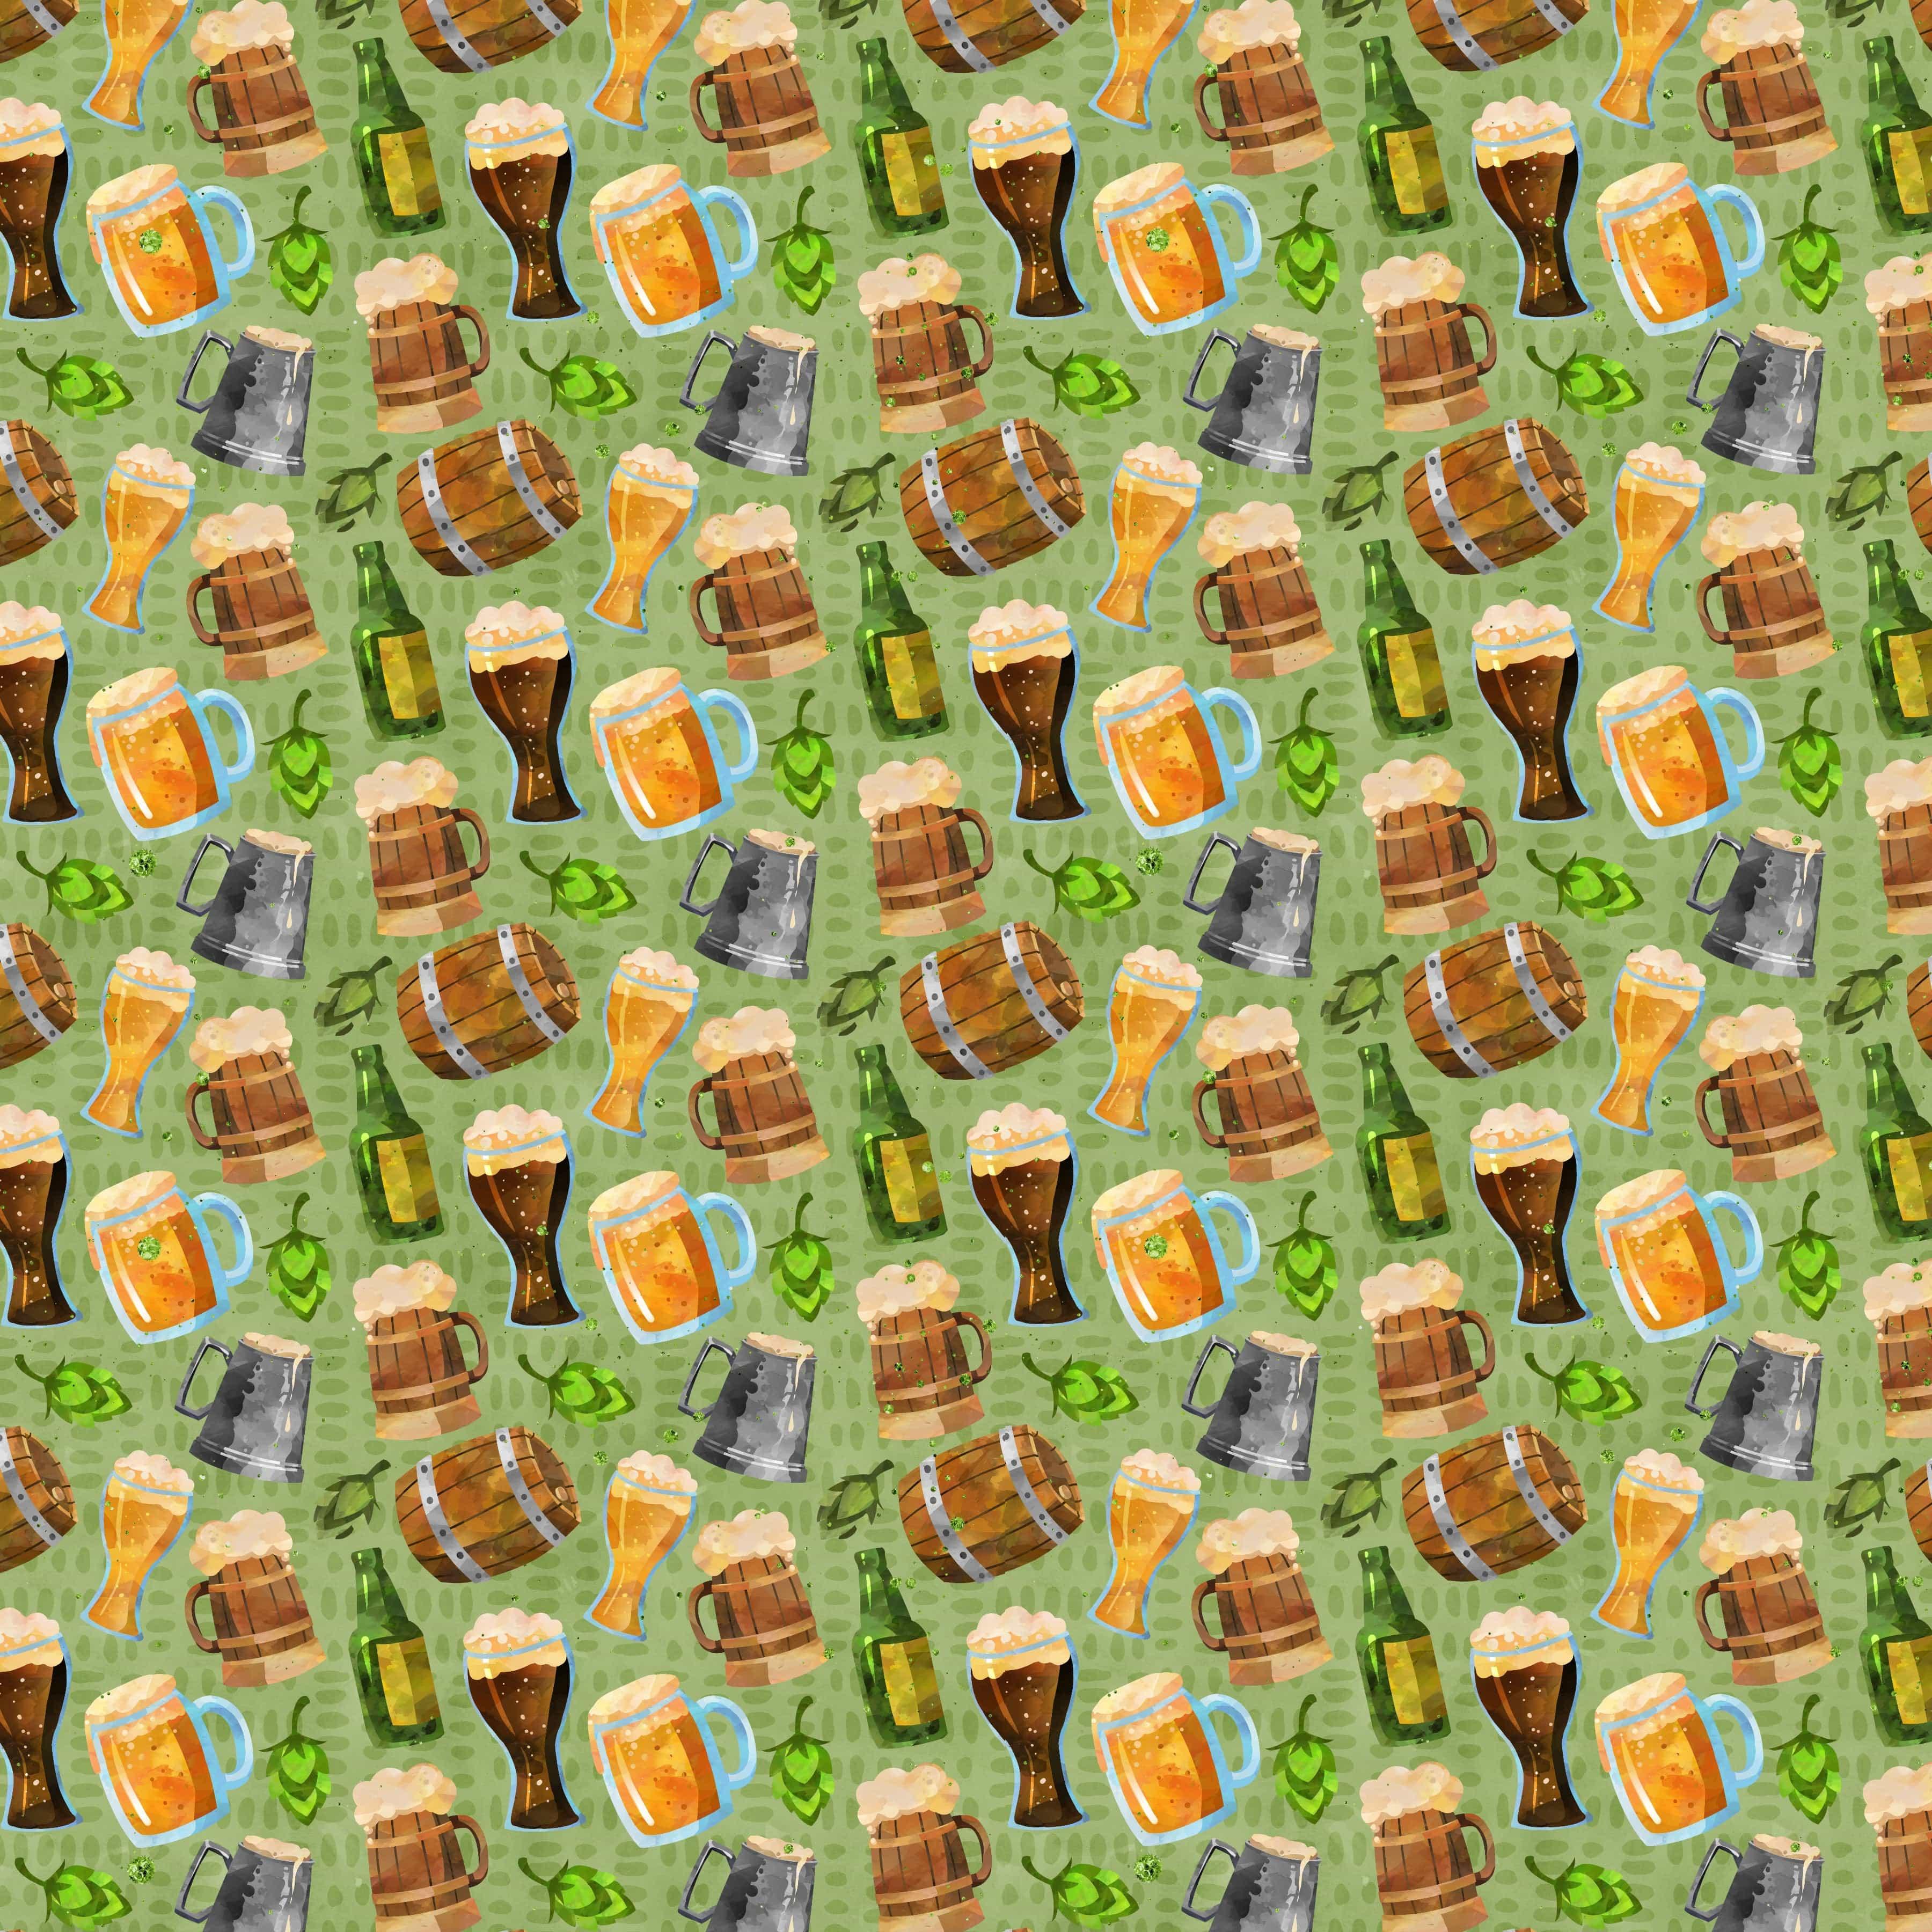 PhantasiaDesign's Oktoberfest Collection Beer Me 12 x 12 Double-Sided Scrapbook Paper by SSC Designs - Scrapbook Supply Companies